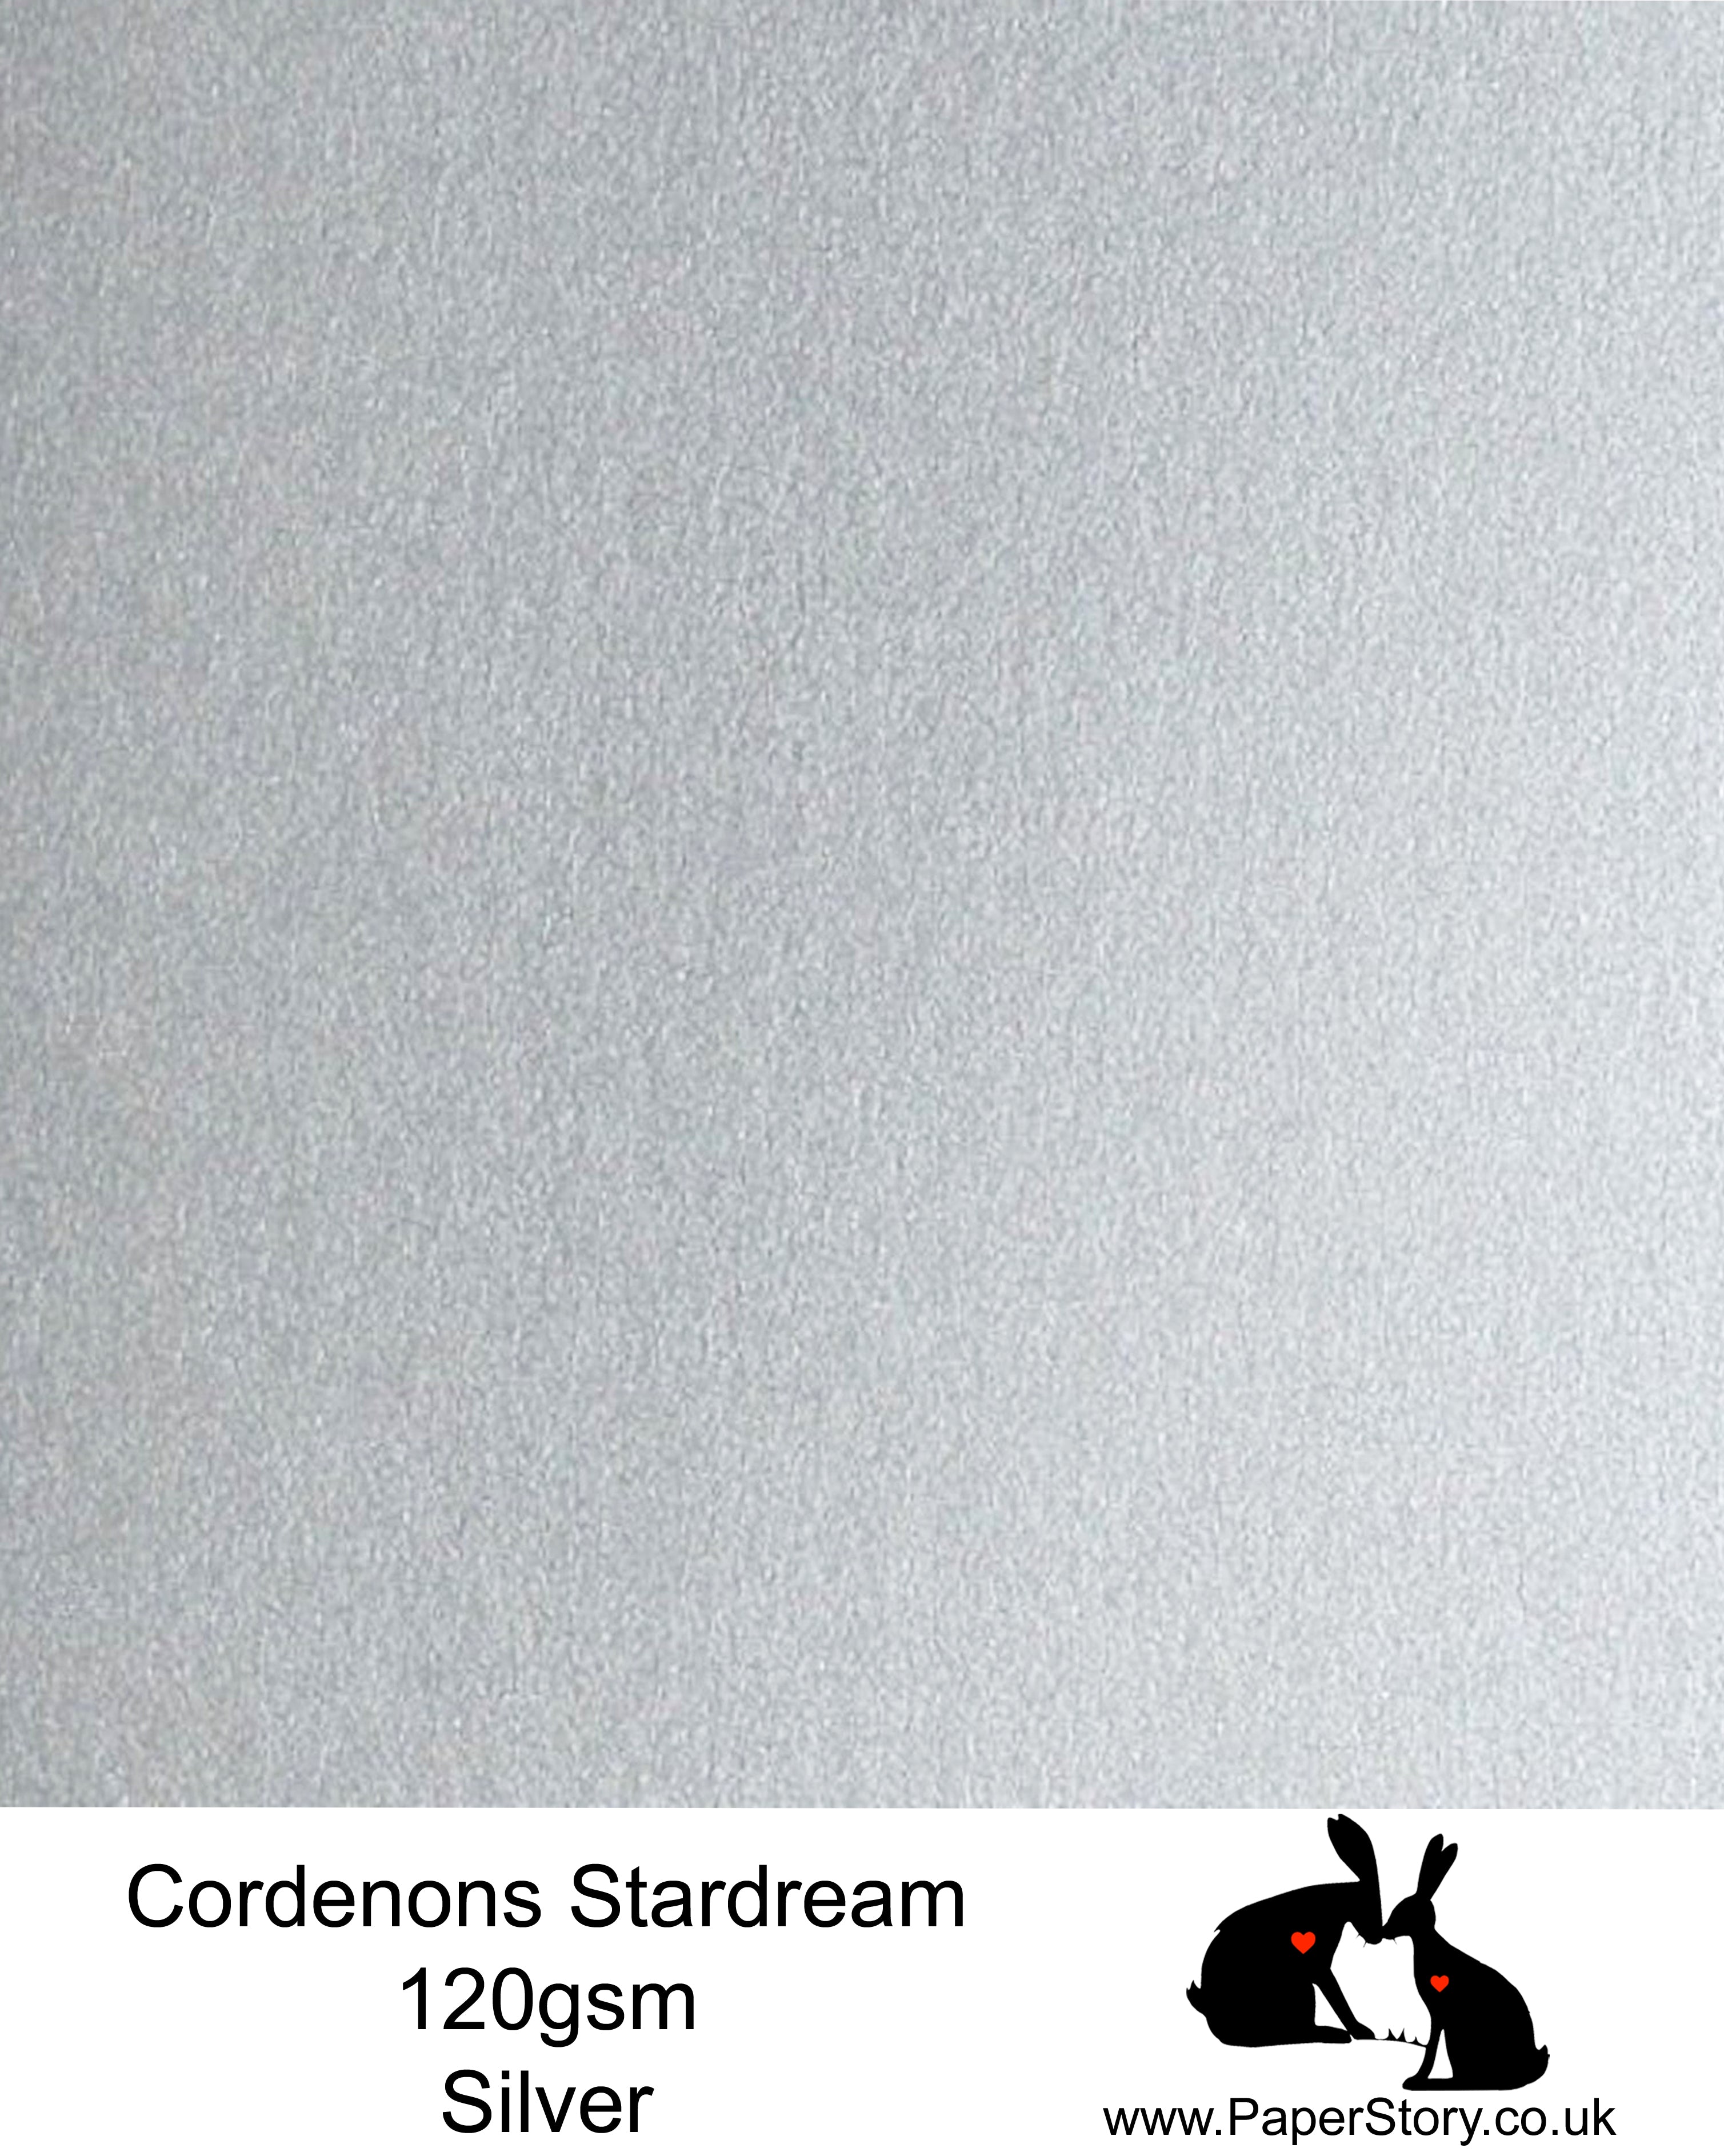 A4 Stardream 120gsm paper for Papercutting, craft, flower making  and wedding stationery. Silver, is a staple colour in most of our papercutting layered kits. Stardream is a luxury Italian paper from Italy, it is a double sided quality Pearlescent paper with a matching colour core. FSC Certified, acid free, archival and PH Neutral